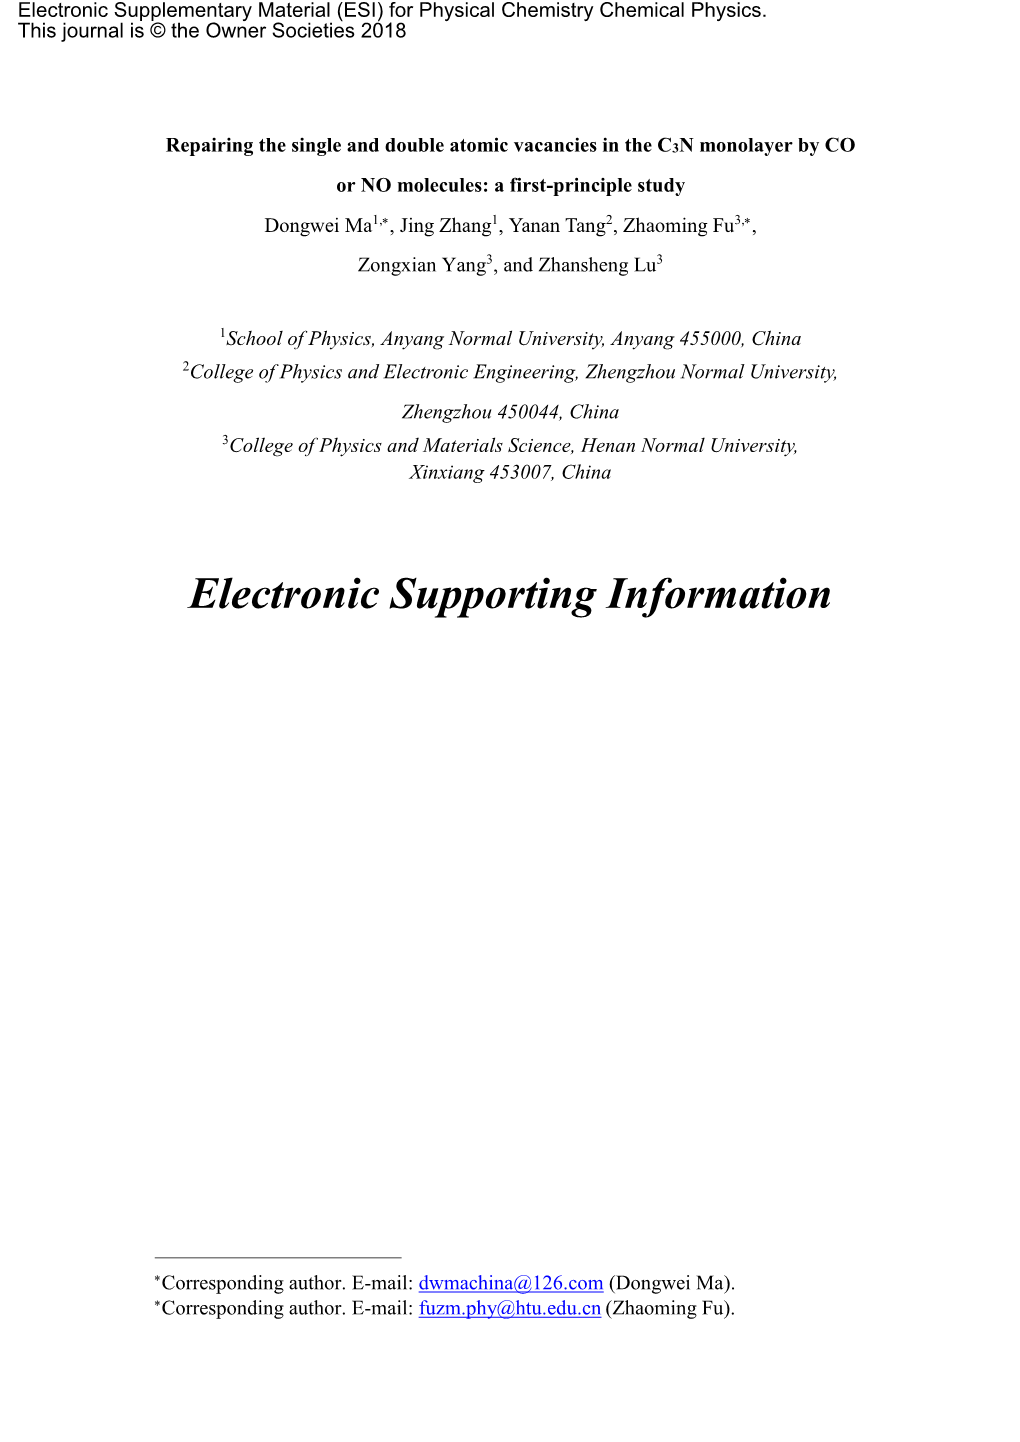 Electronic Supporting Information